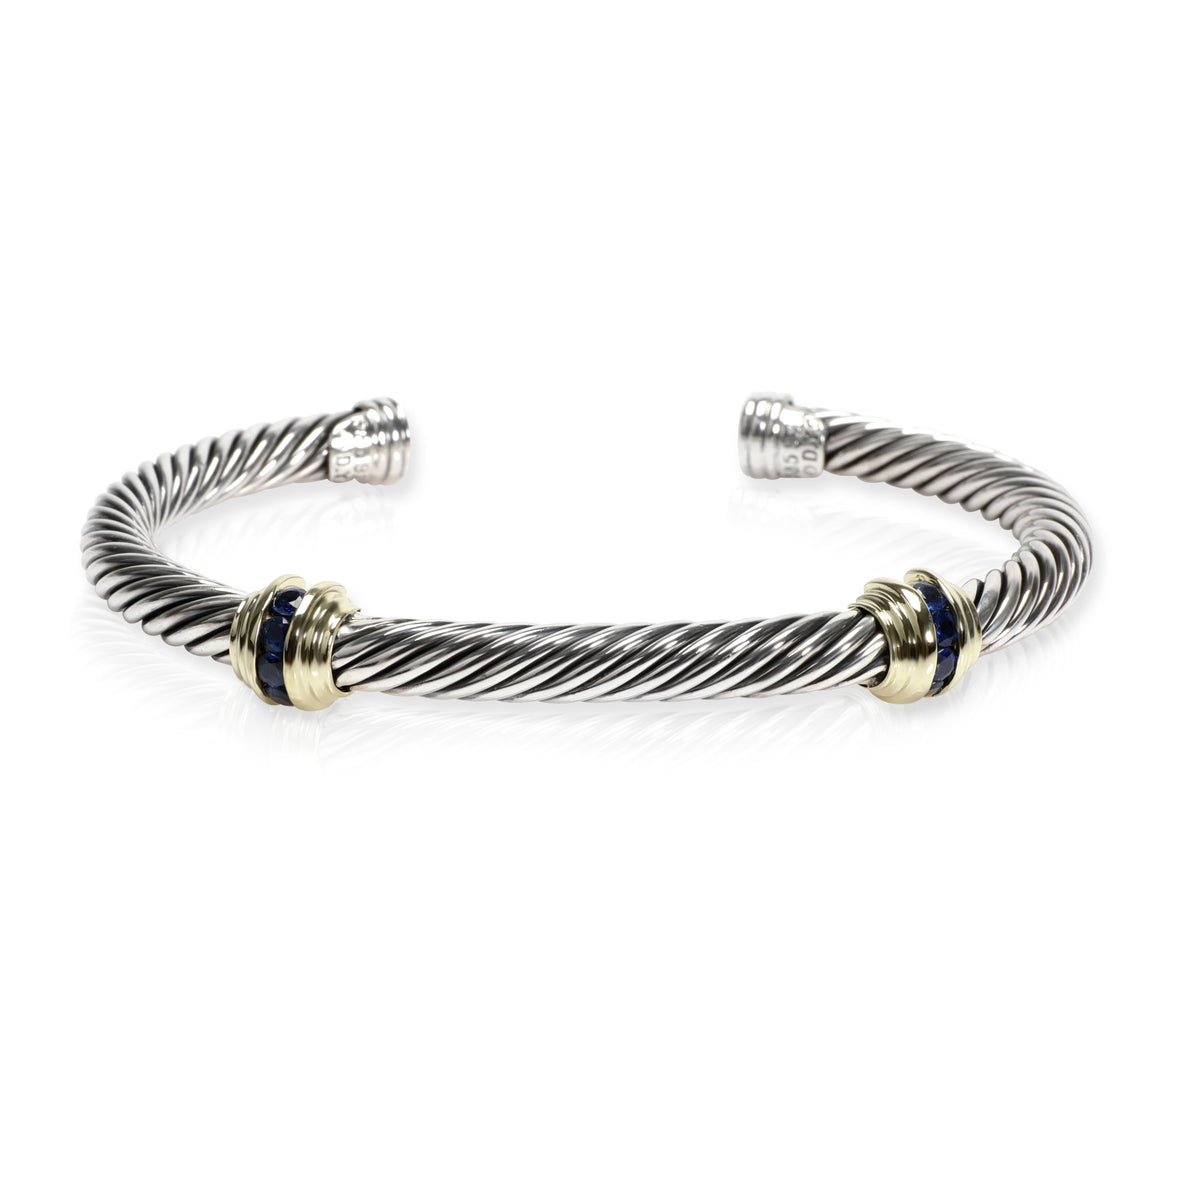 David Yurman Cable Collection Sapphire Bracelet in 14K Gold & Sterling Silver